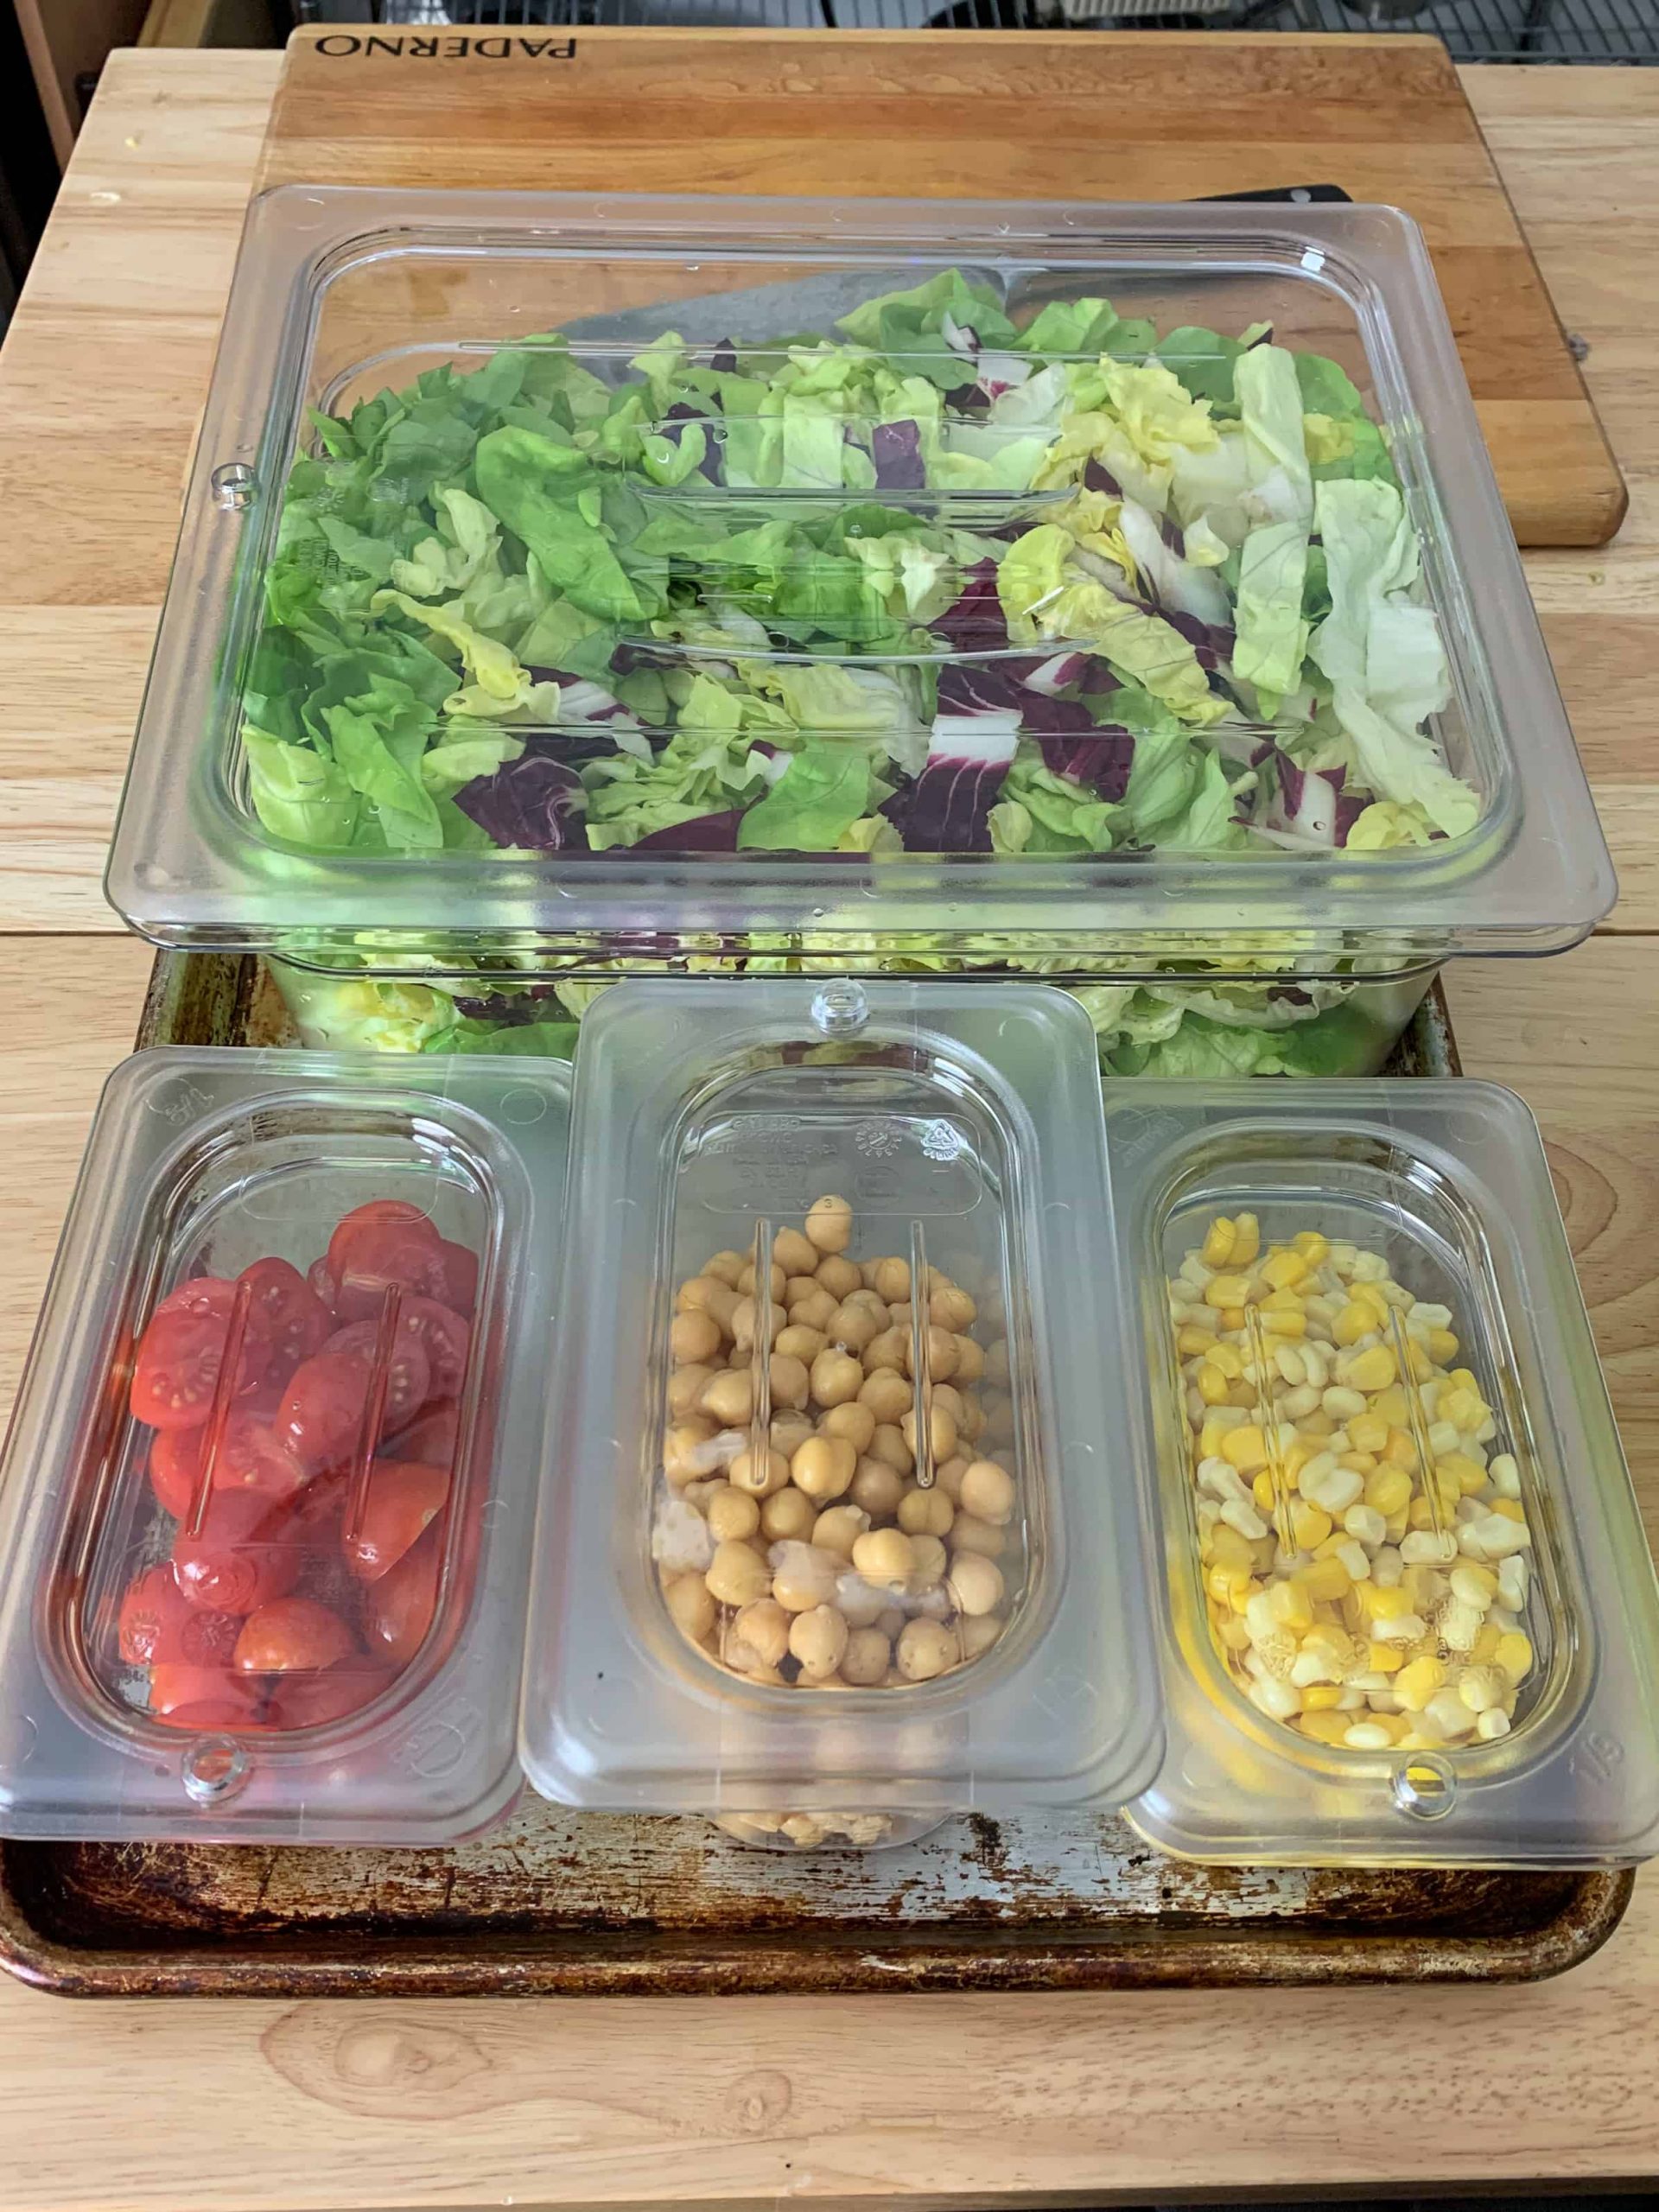 How To Eat More Salad With An At-Home Salad Bar - How To Make Dinner